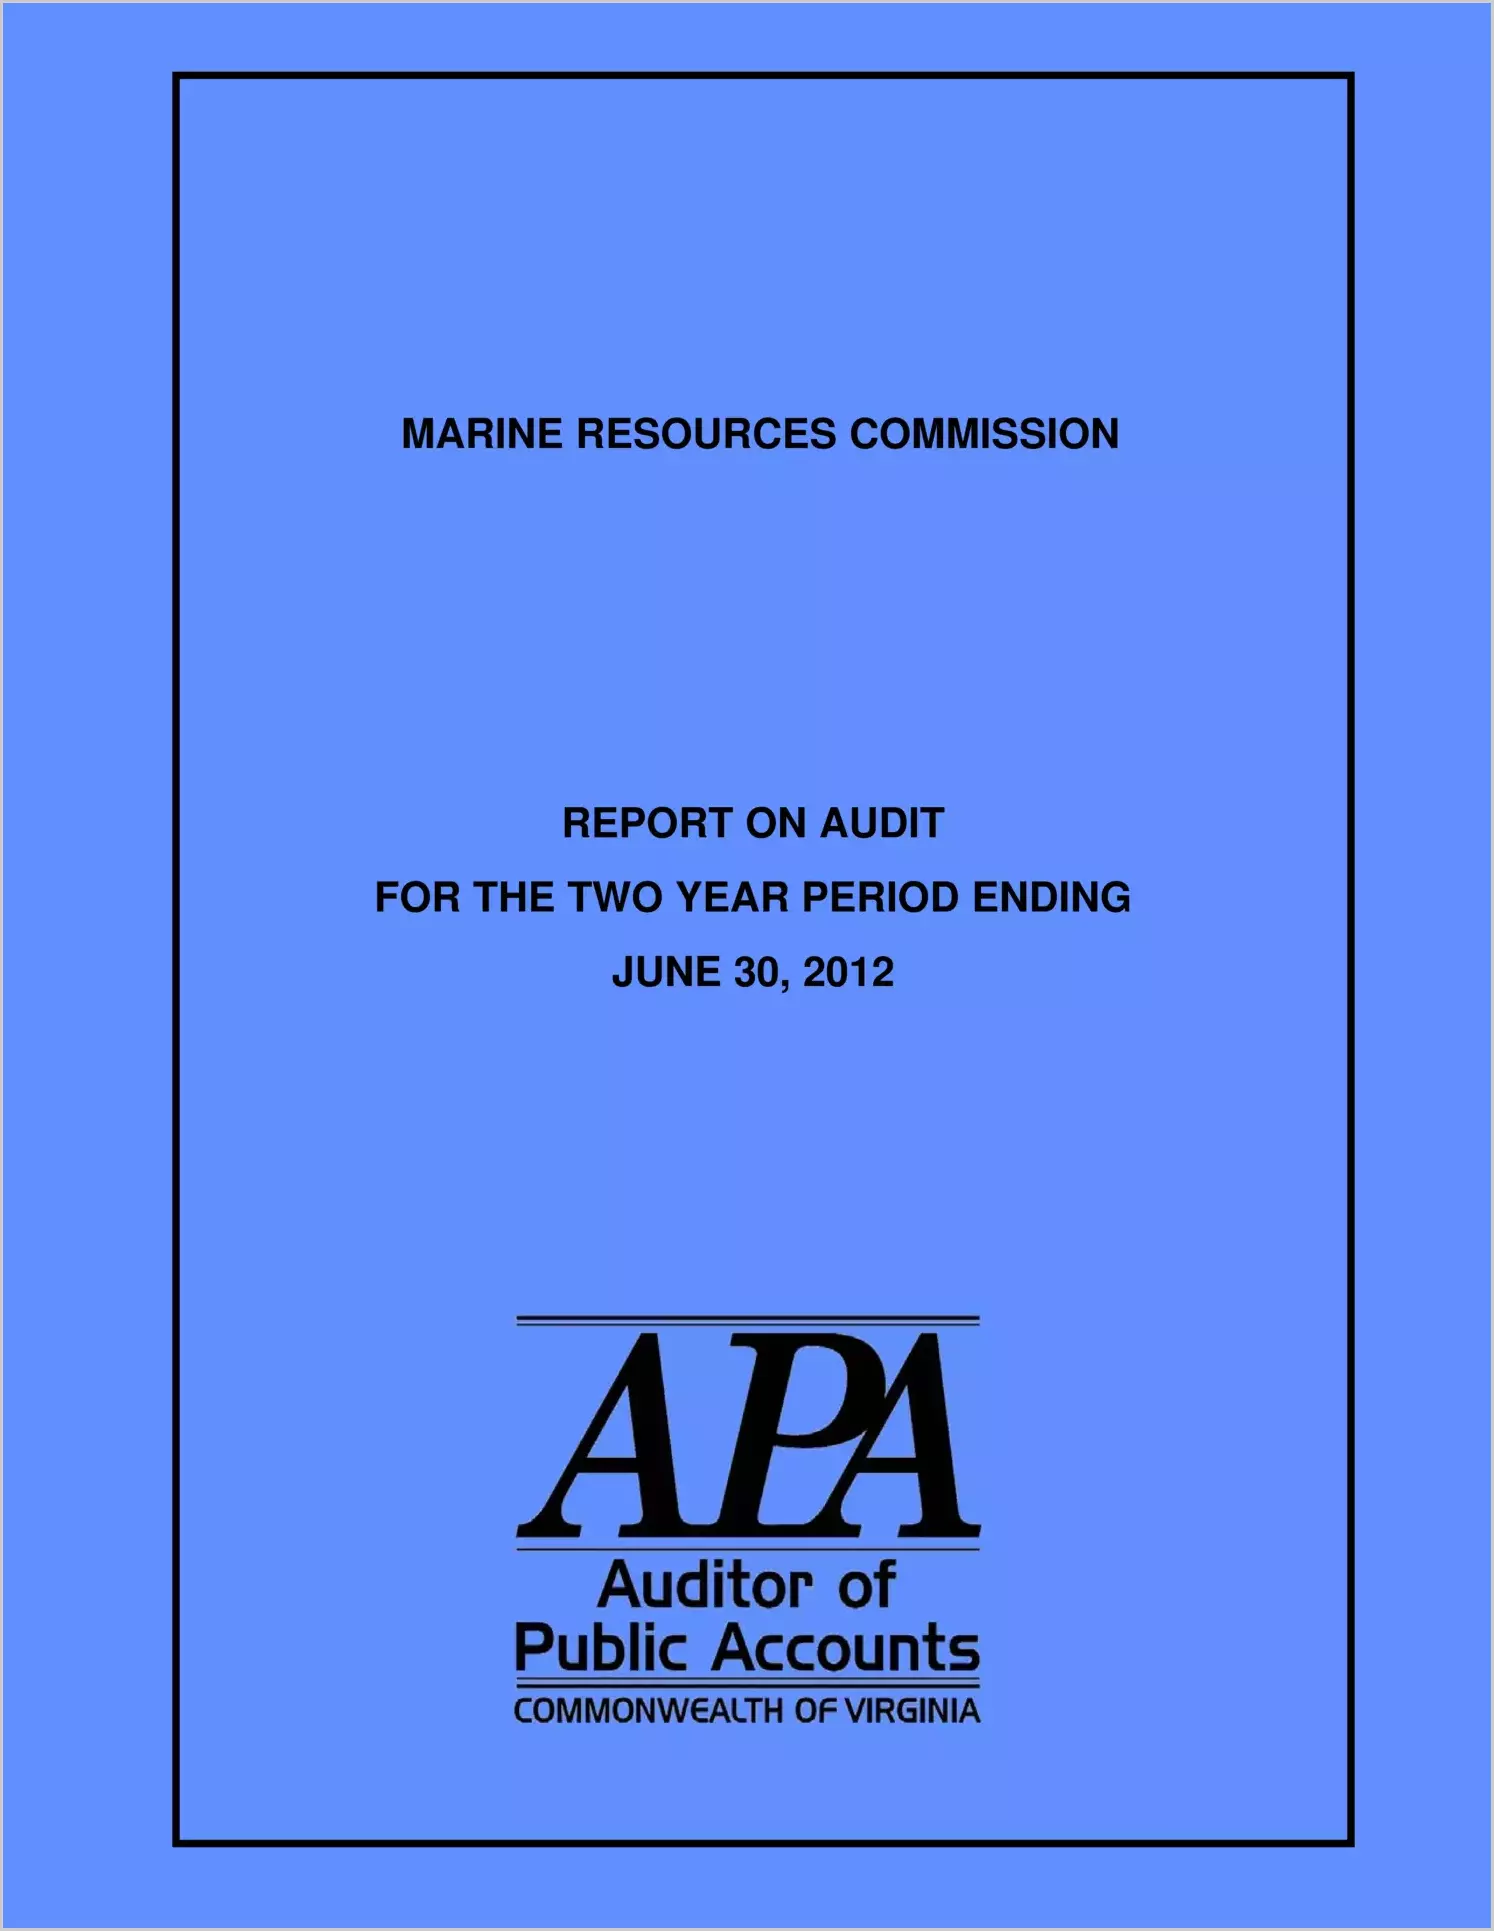 Virginia Marine Resources Commission Report on Audit for two-year period ended June 30, 2012